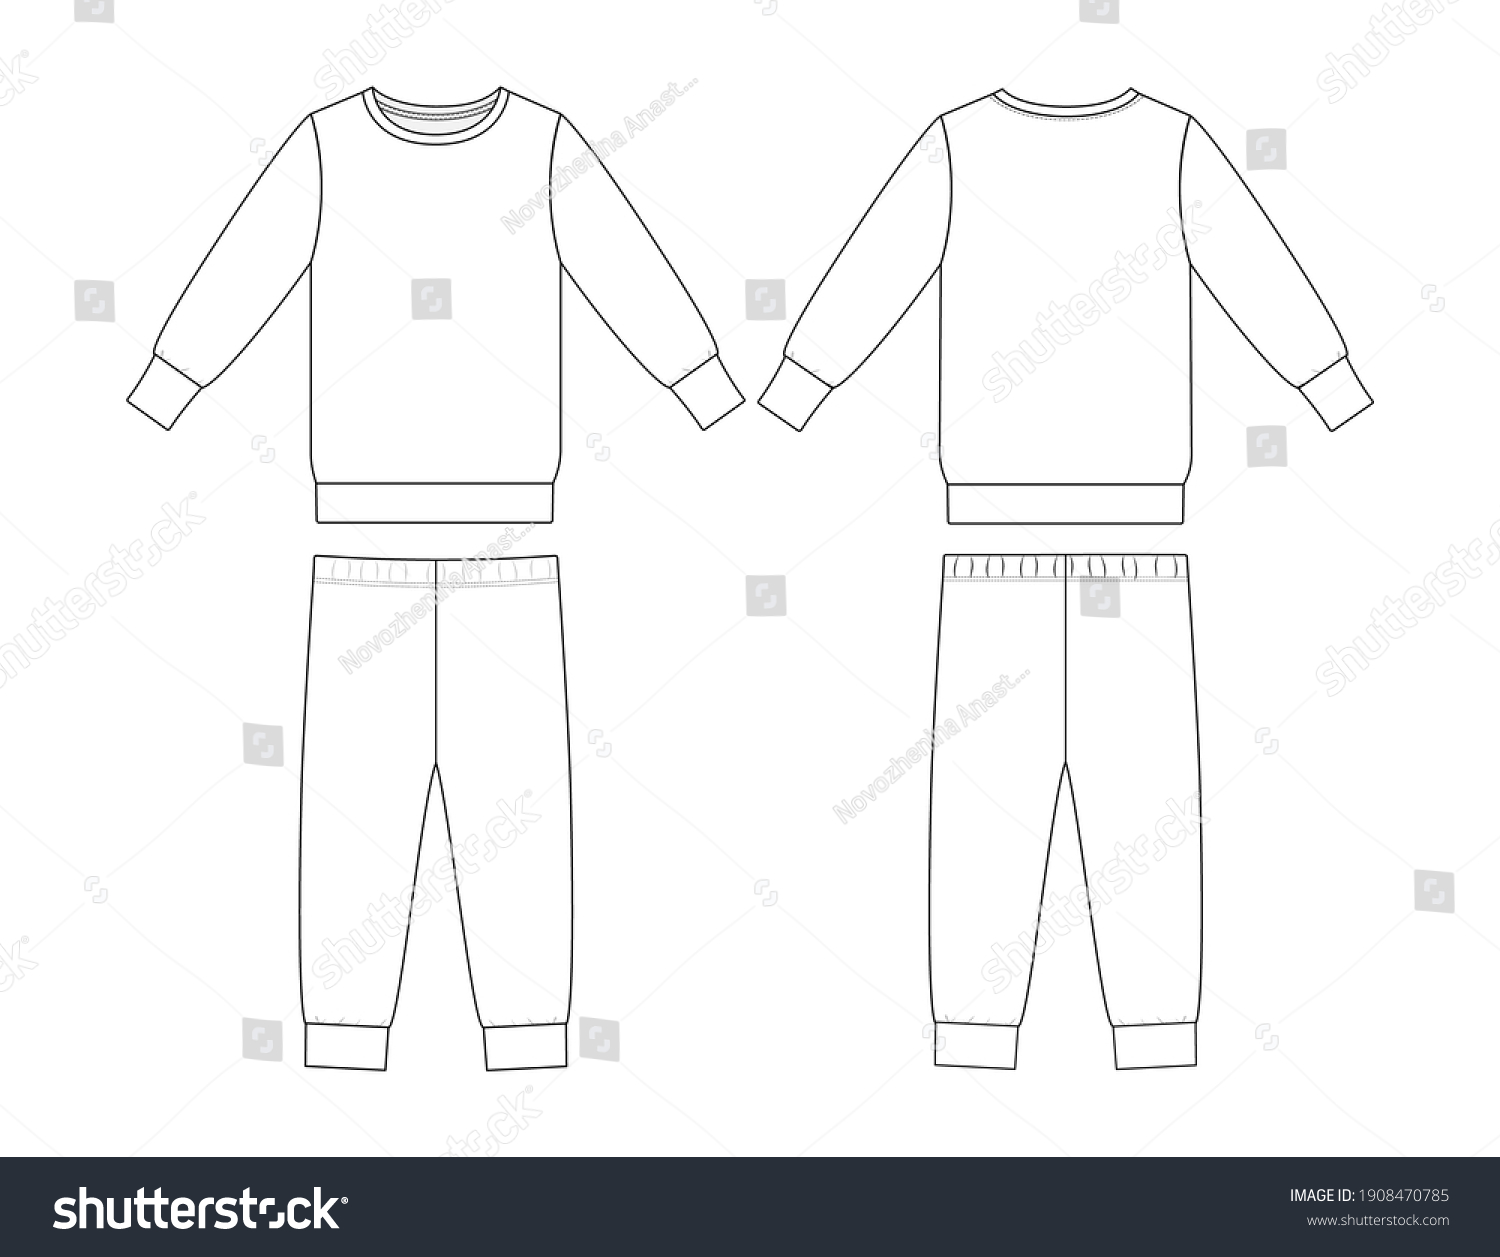 Fashion Technical Drawing Children Sport Suit Stock Vector (Royalty ...